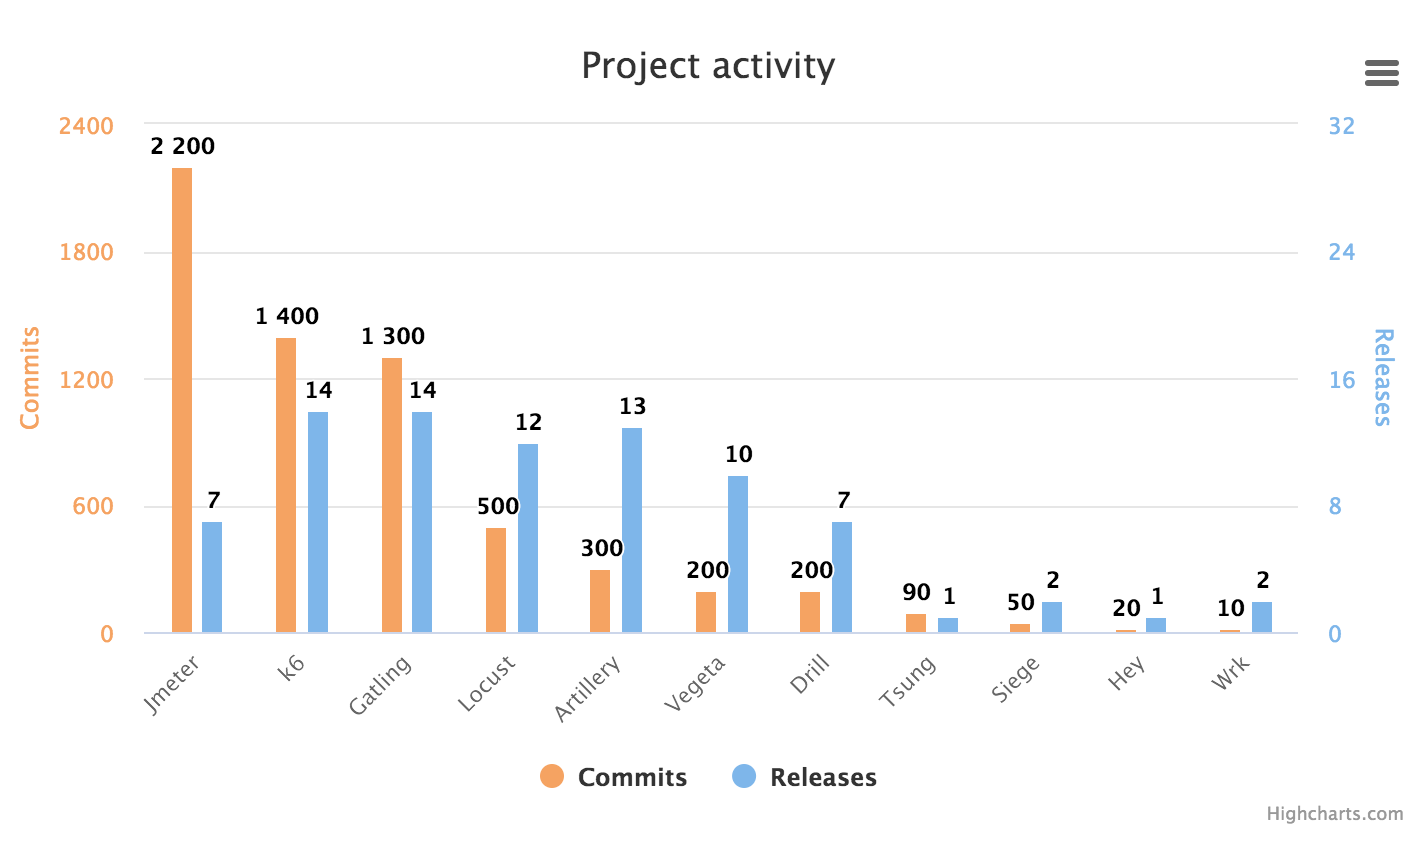 A chart with project activity for the tools reviewed in the piece, including commits and releases, with JMeter having the highest commits, and k6 and Gatling the most releases